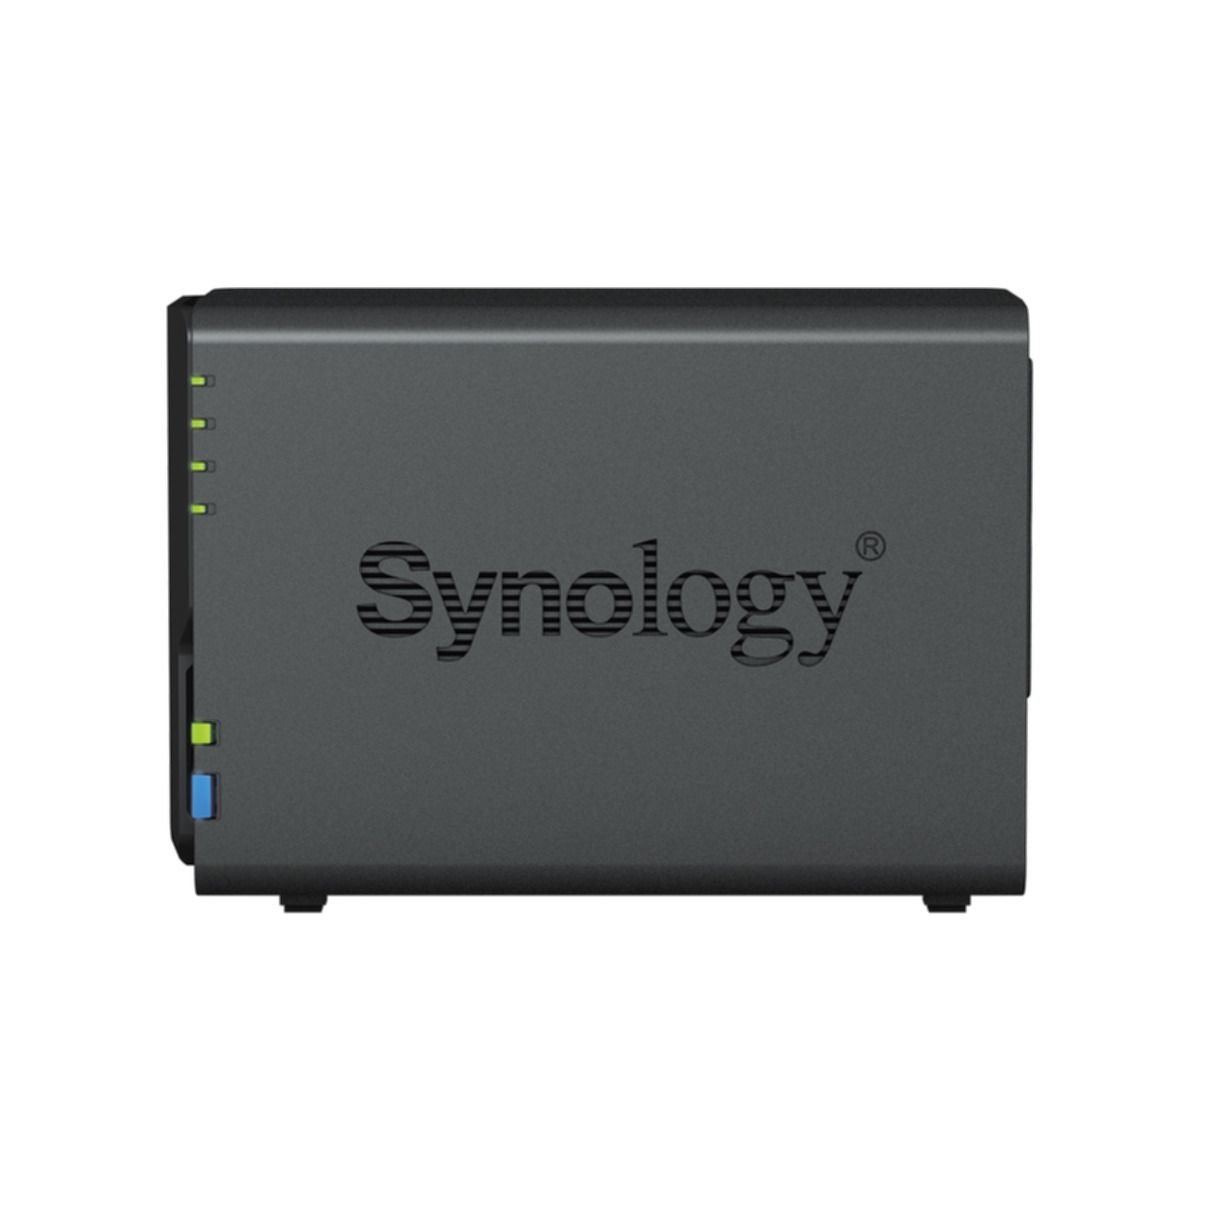 SYNOLOGY DS223 0 extern TB 3,5 Zoll